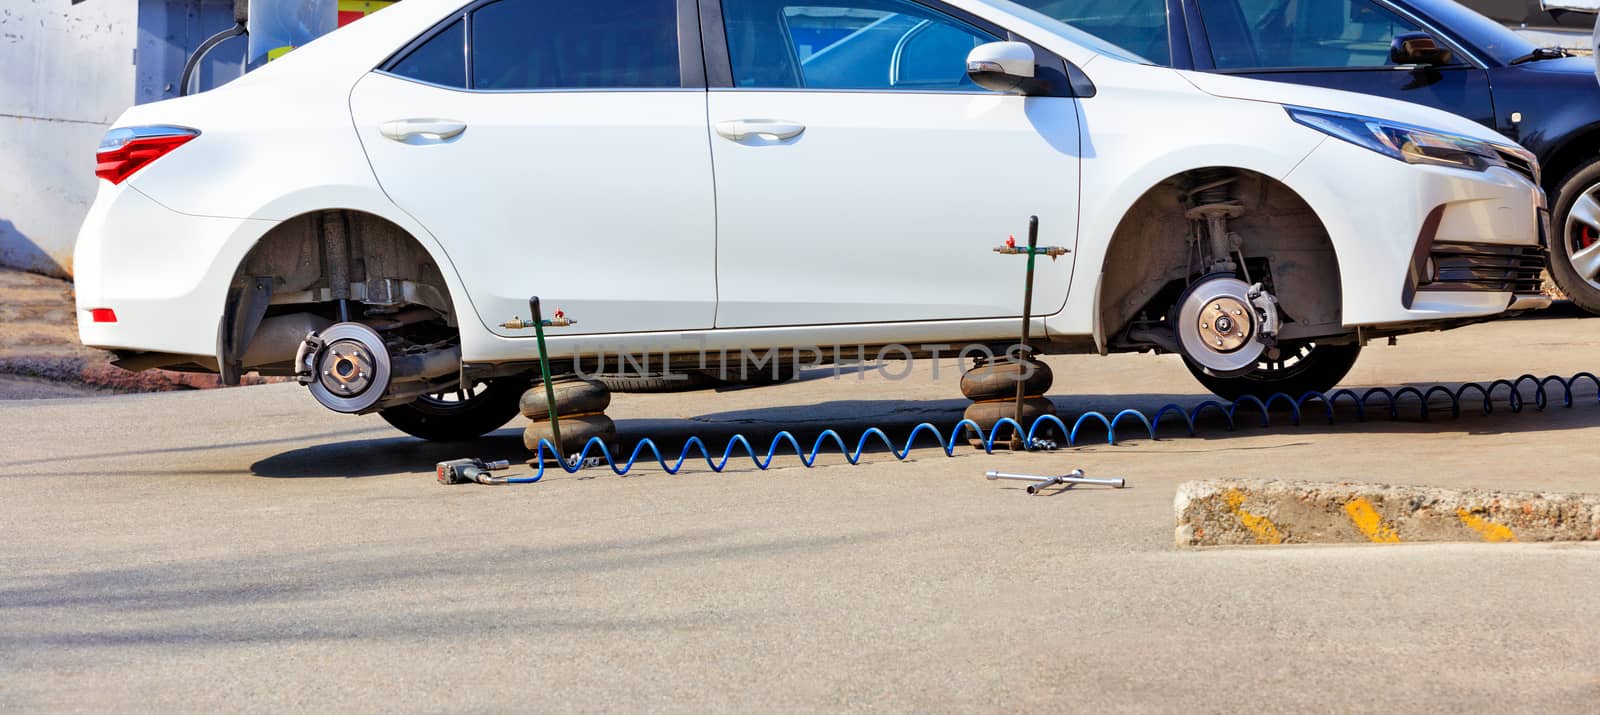 A white car without wheels stands on air jacks at a service station to replace tires.